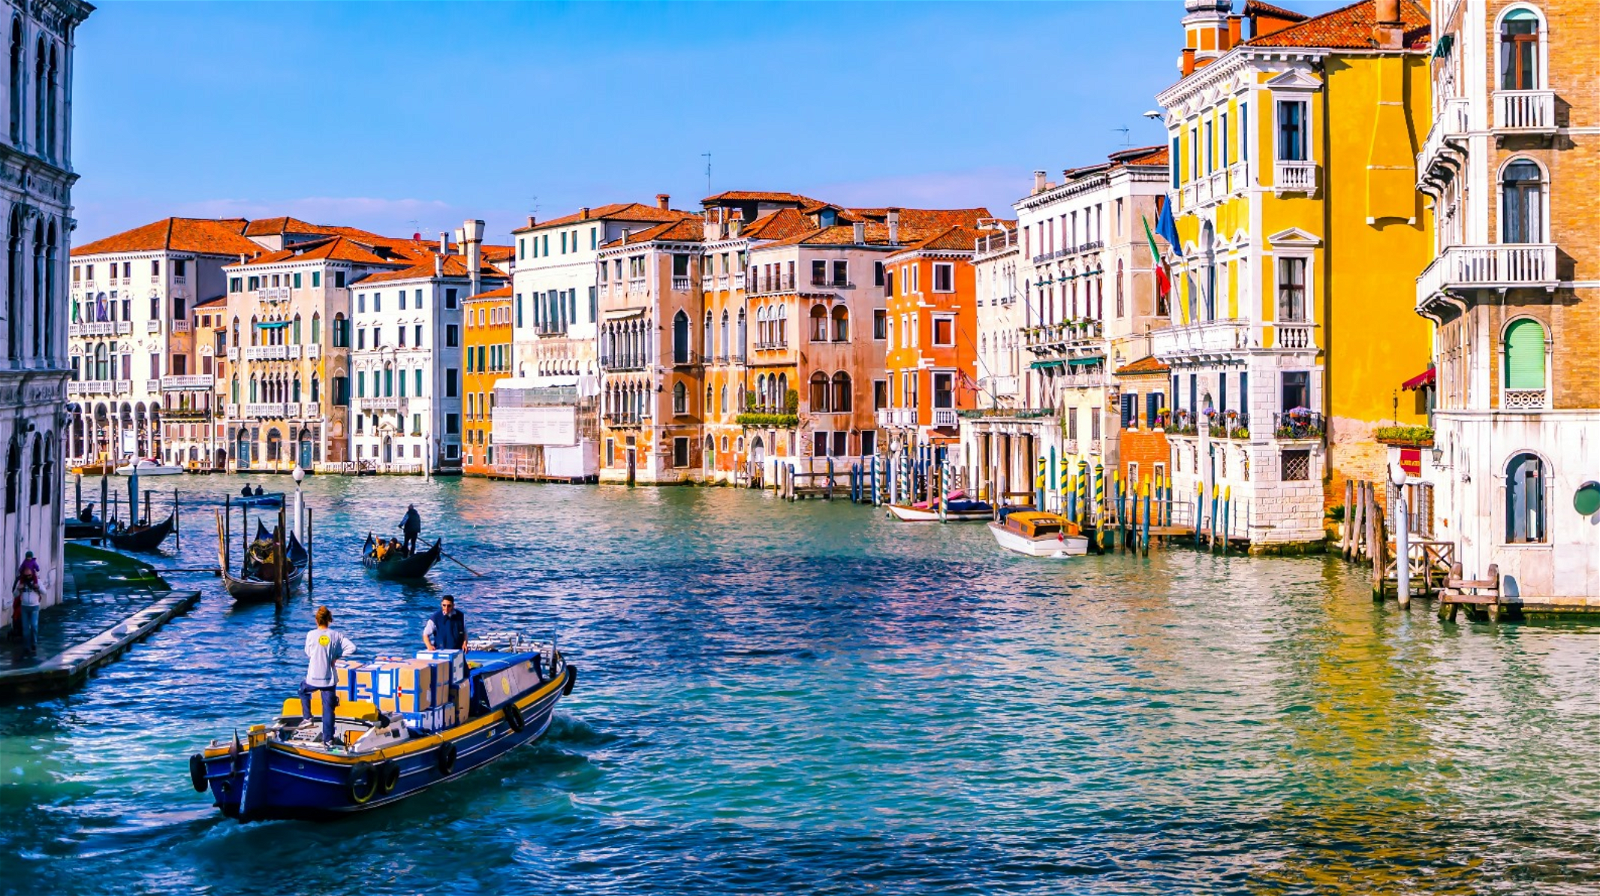  Venice's Top 10 can't-miss experiences to live like a local